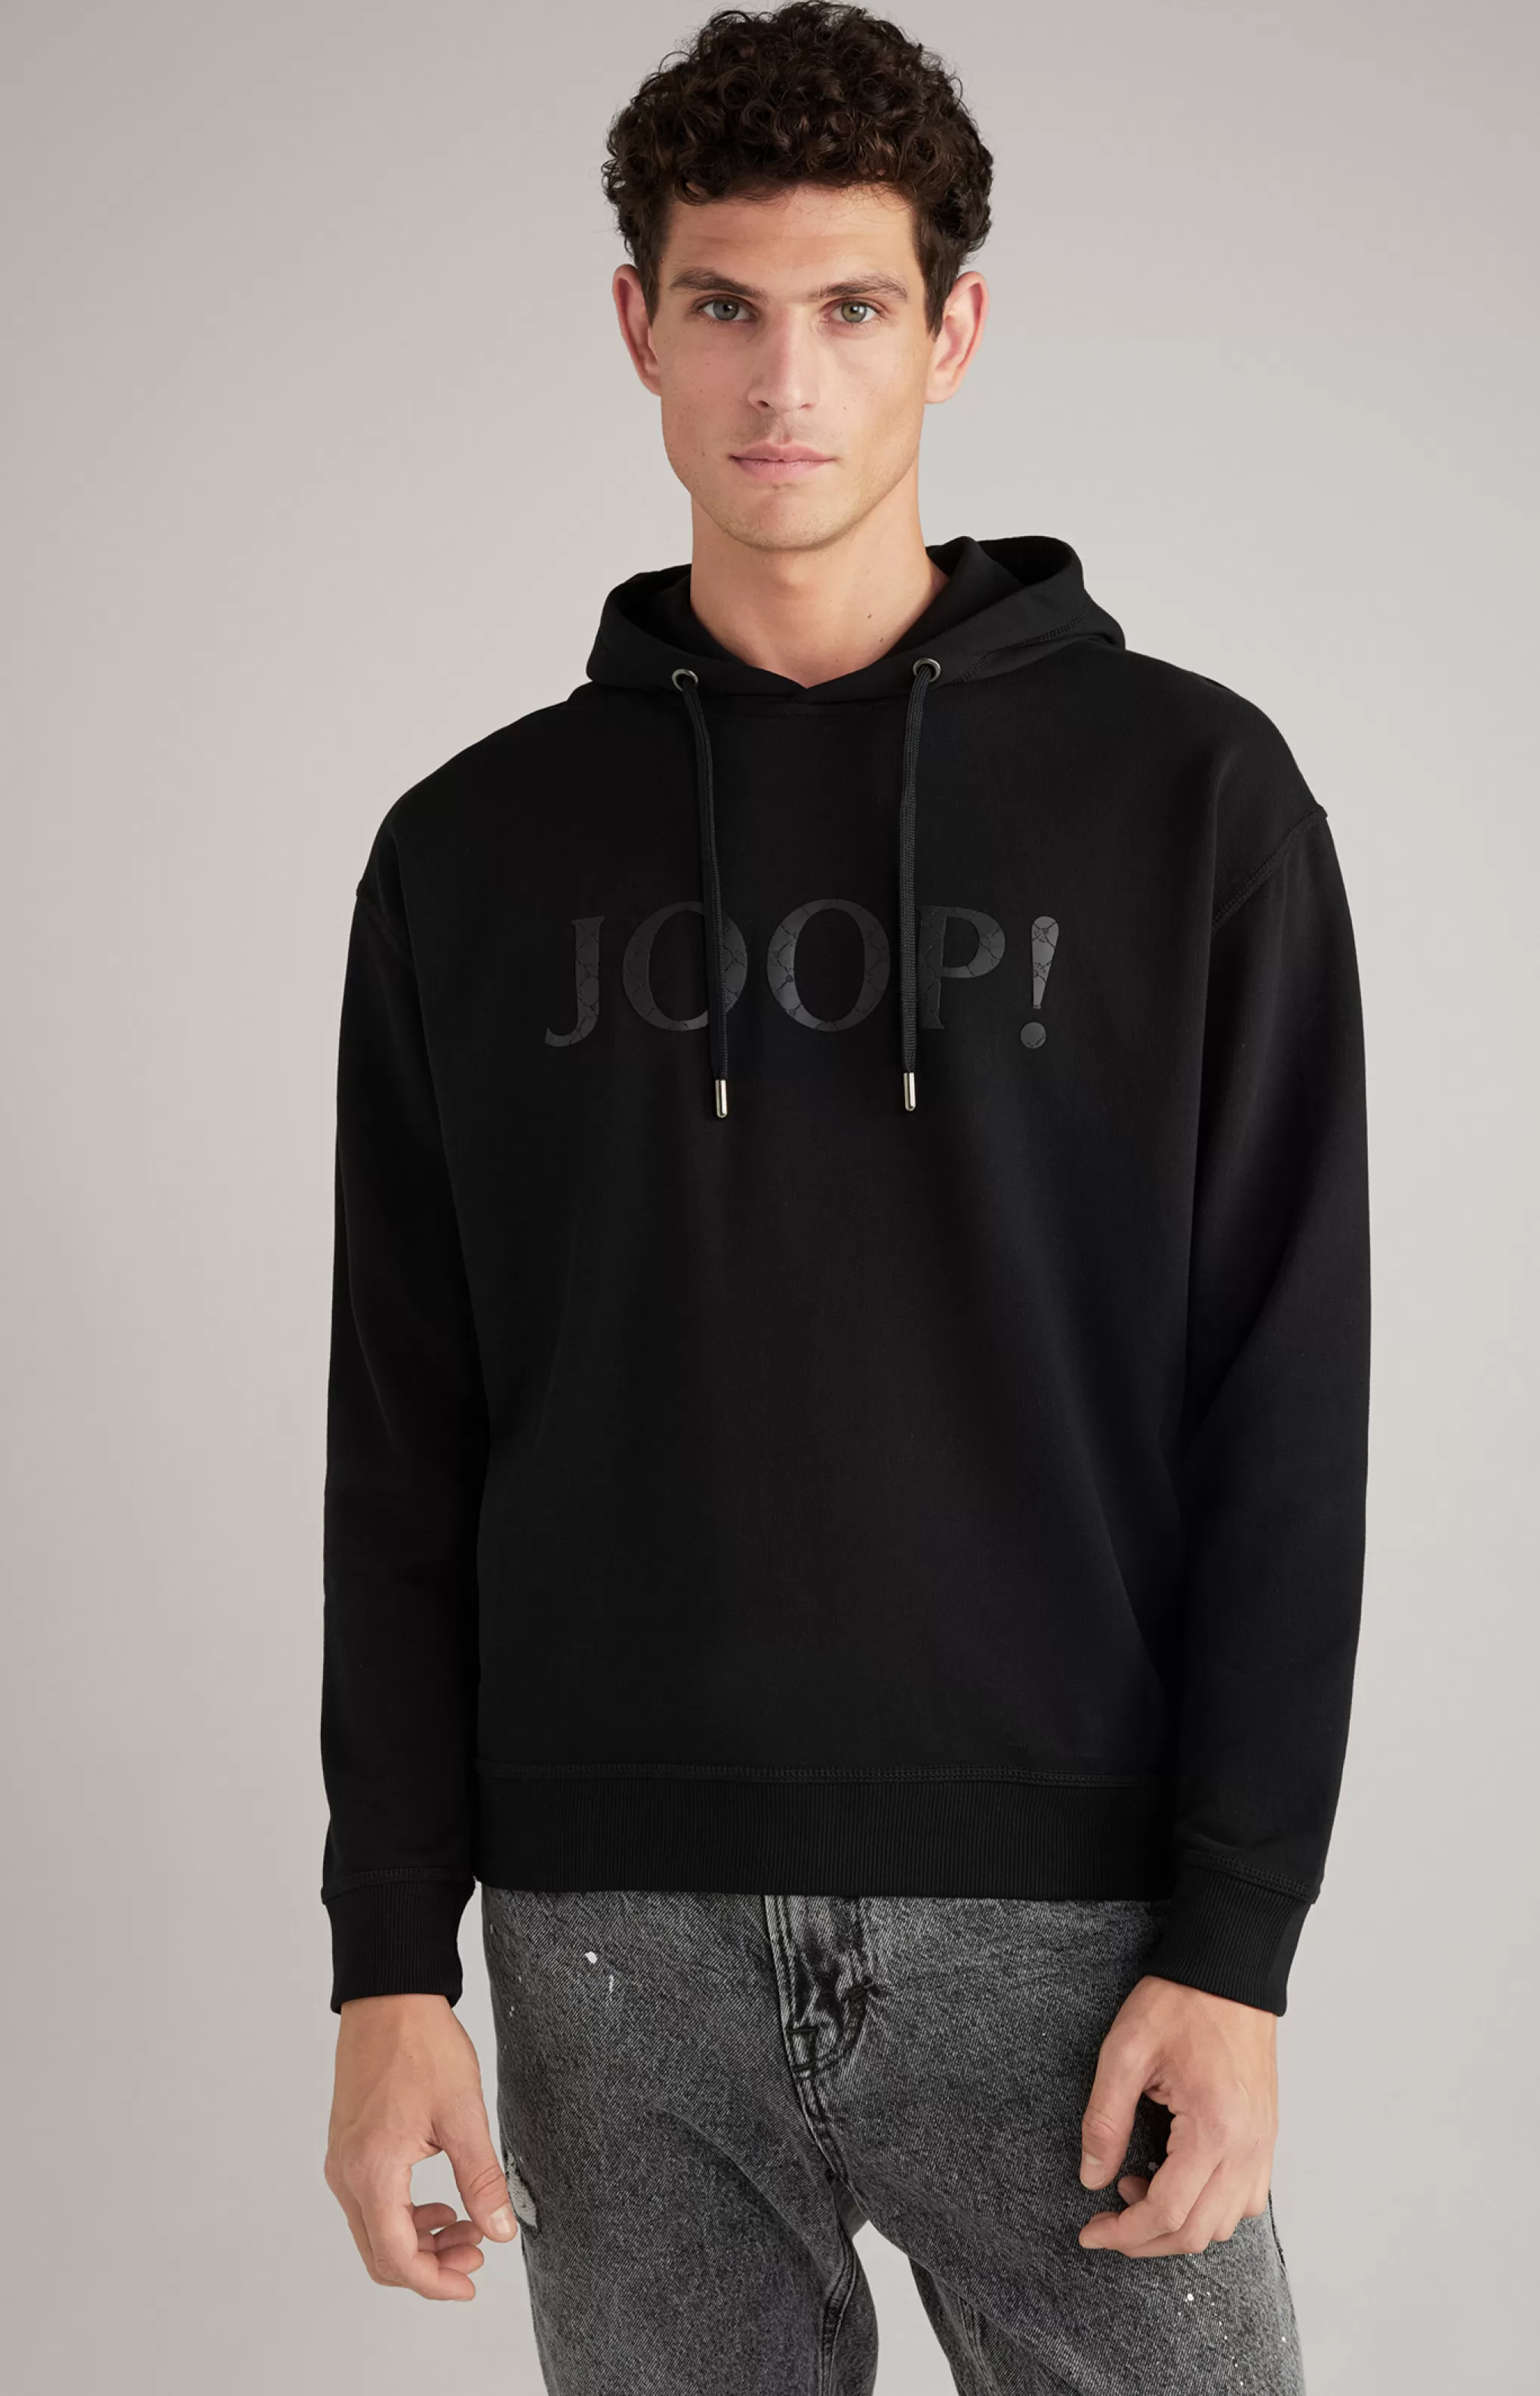 Sweatshirts | Clothing*JOOP Sweatshirts | Clothing Timonos Cotton Hoodie in